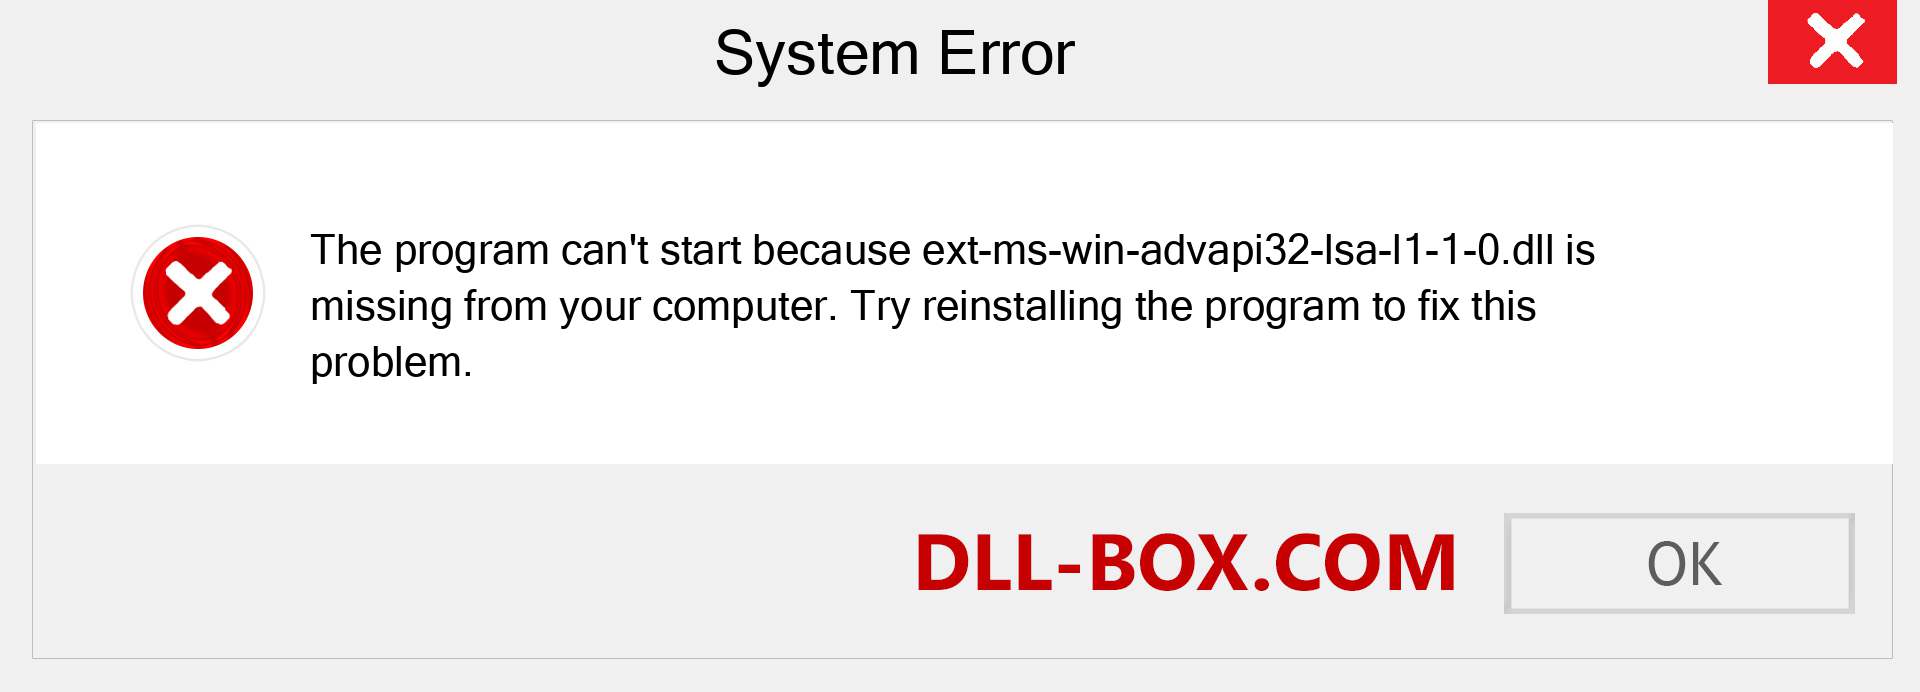  ext-ms-win-advapi32-lsa-l1-1-0.dll file is missing?. Download for Windows 7, 8, 10 - Fix  ext-ms-win-advapi32-lsa-l1-1-0 dll Missing Error on Windows, photos, images